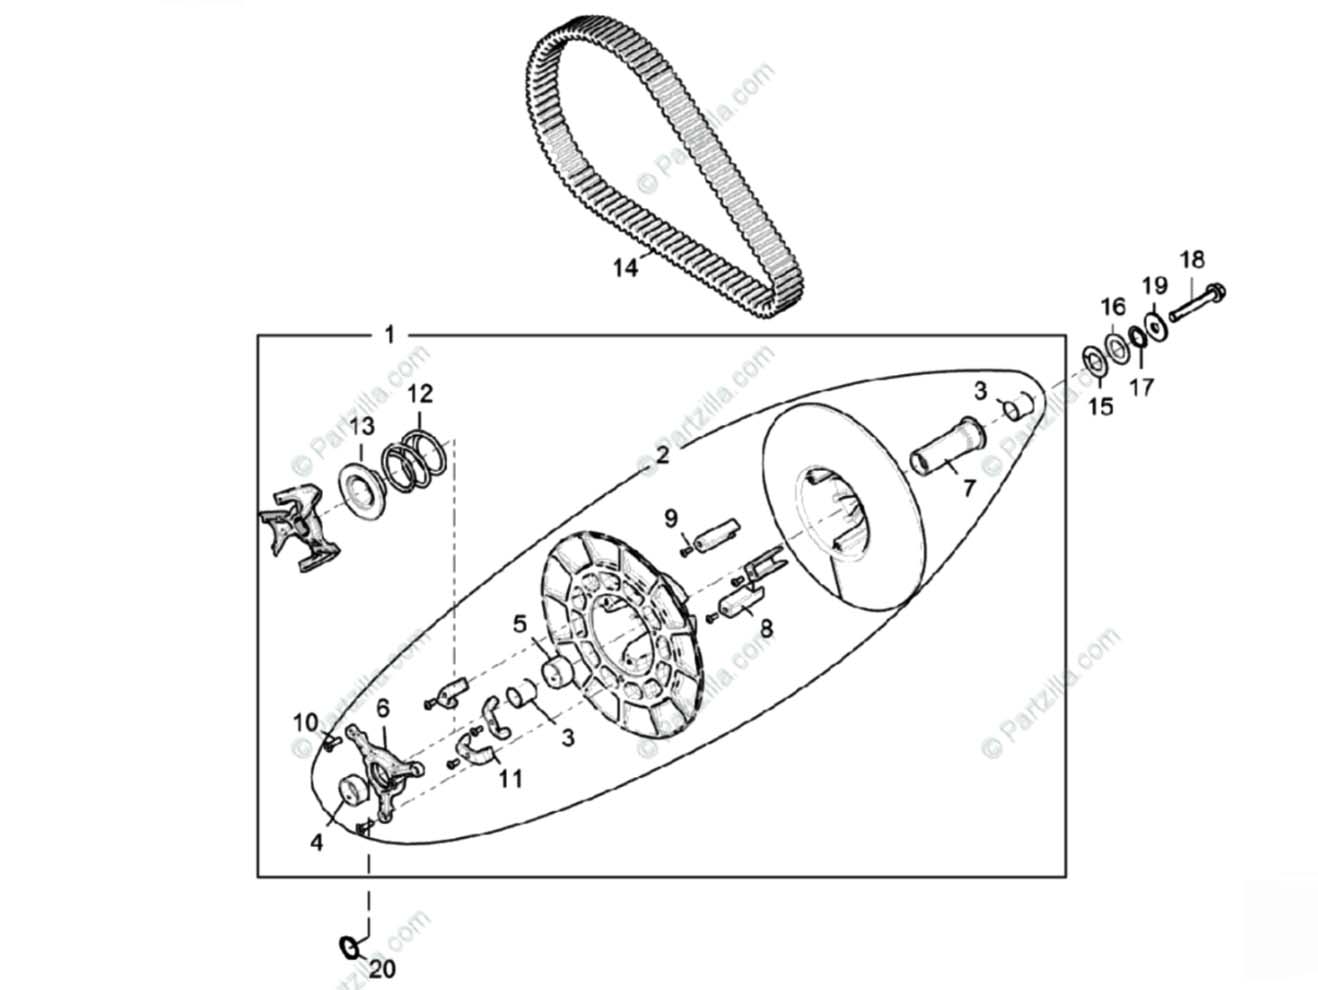 Primary clutch assembly parts diagram